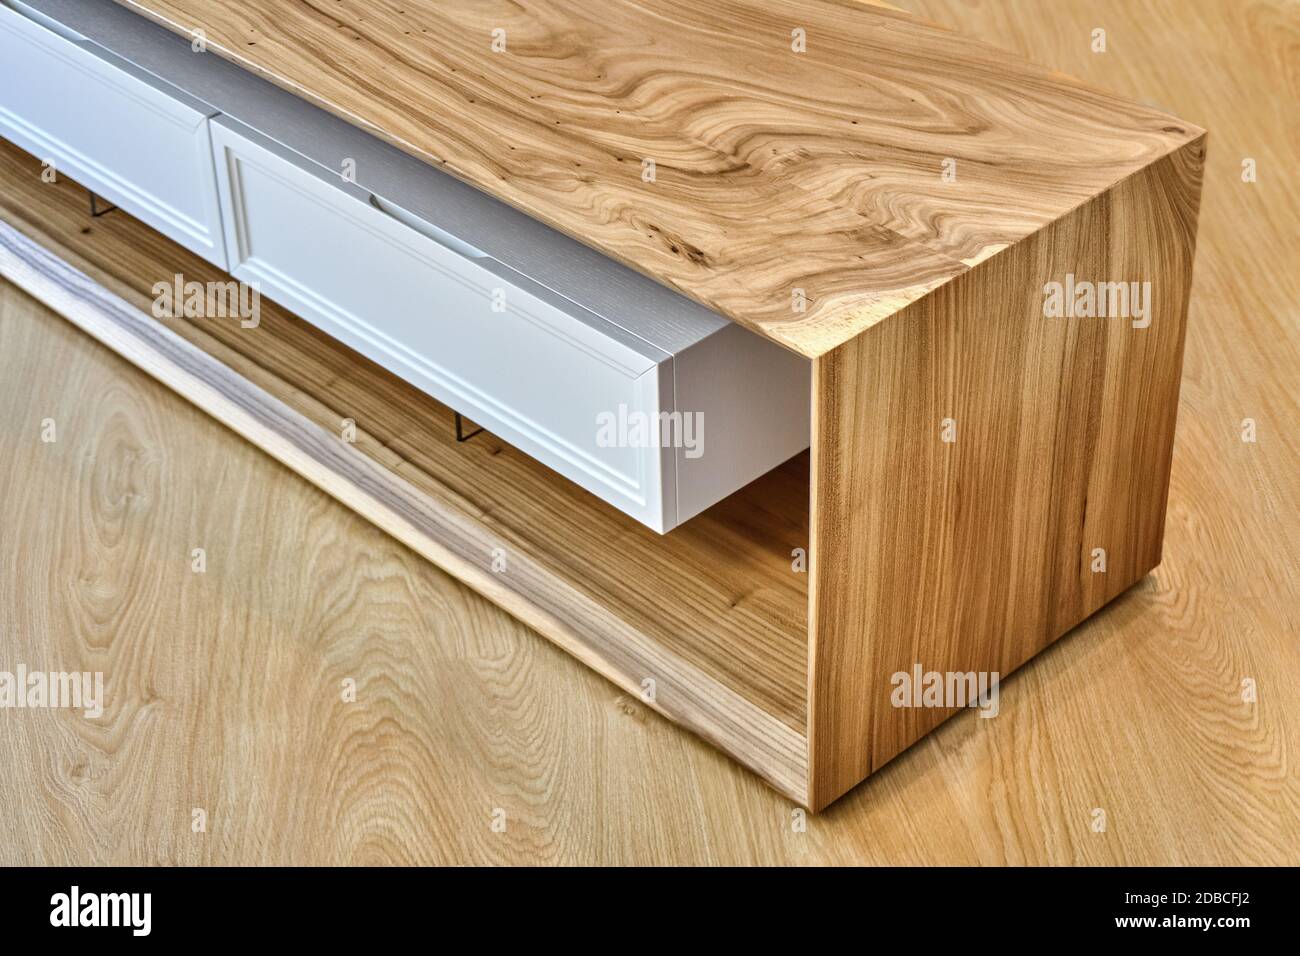 Live edge elm slab media cabinet in contemporary living room. Modern furniture close-up Stock Photo